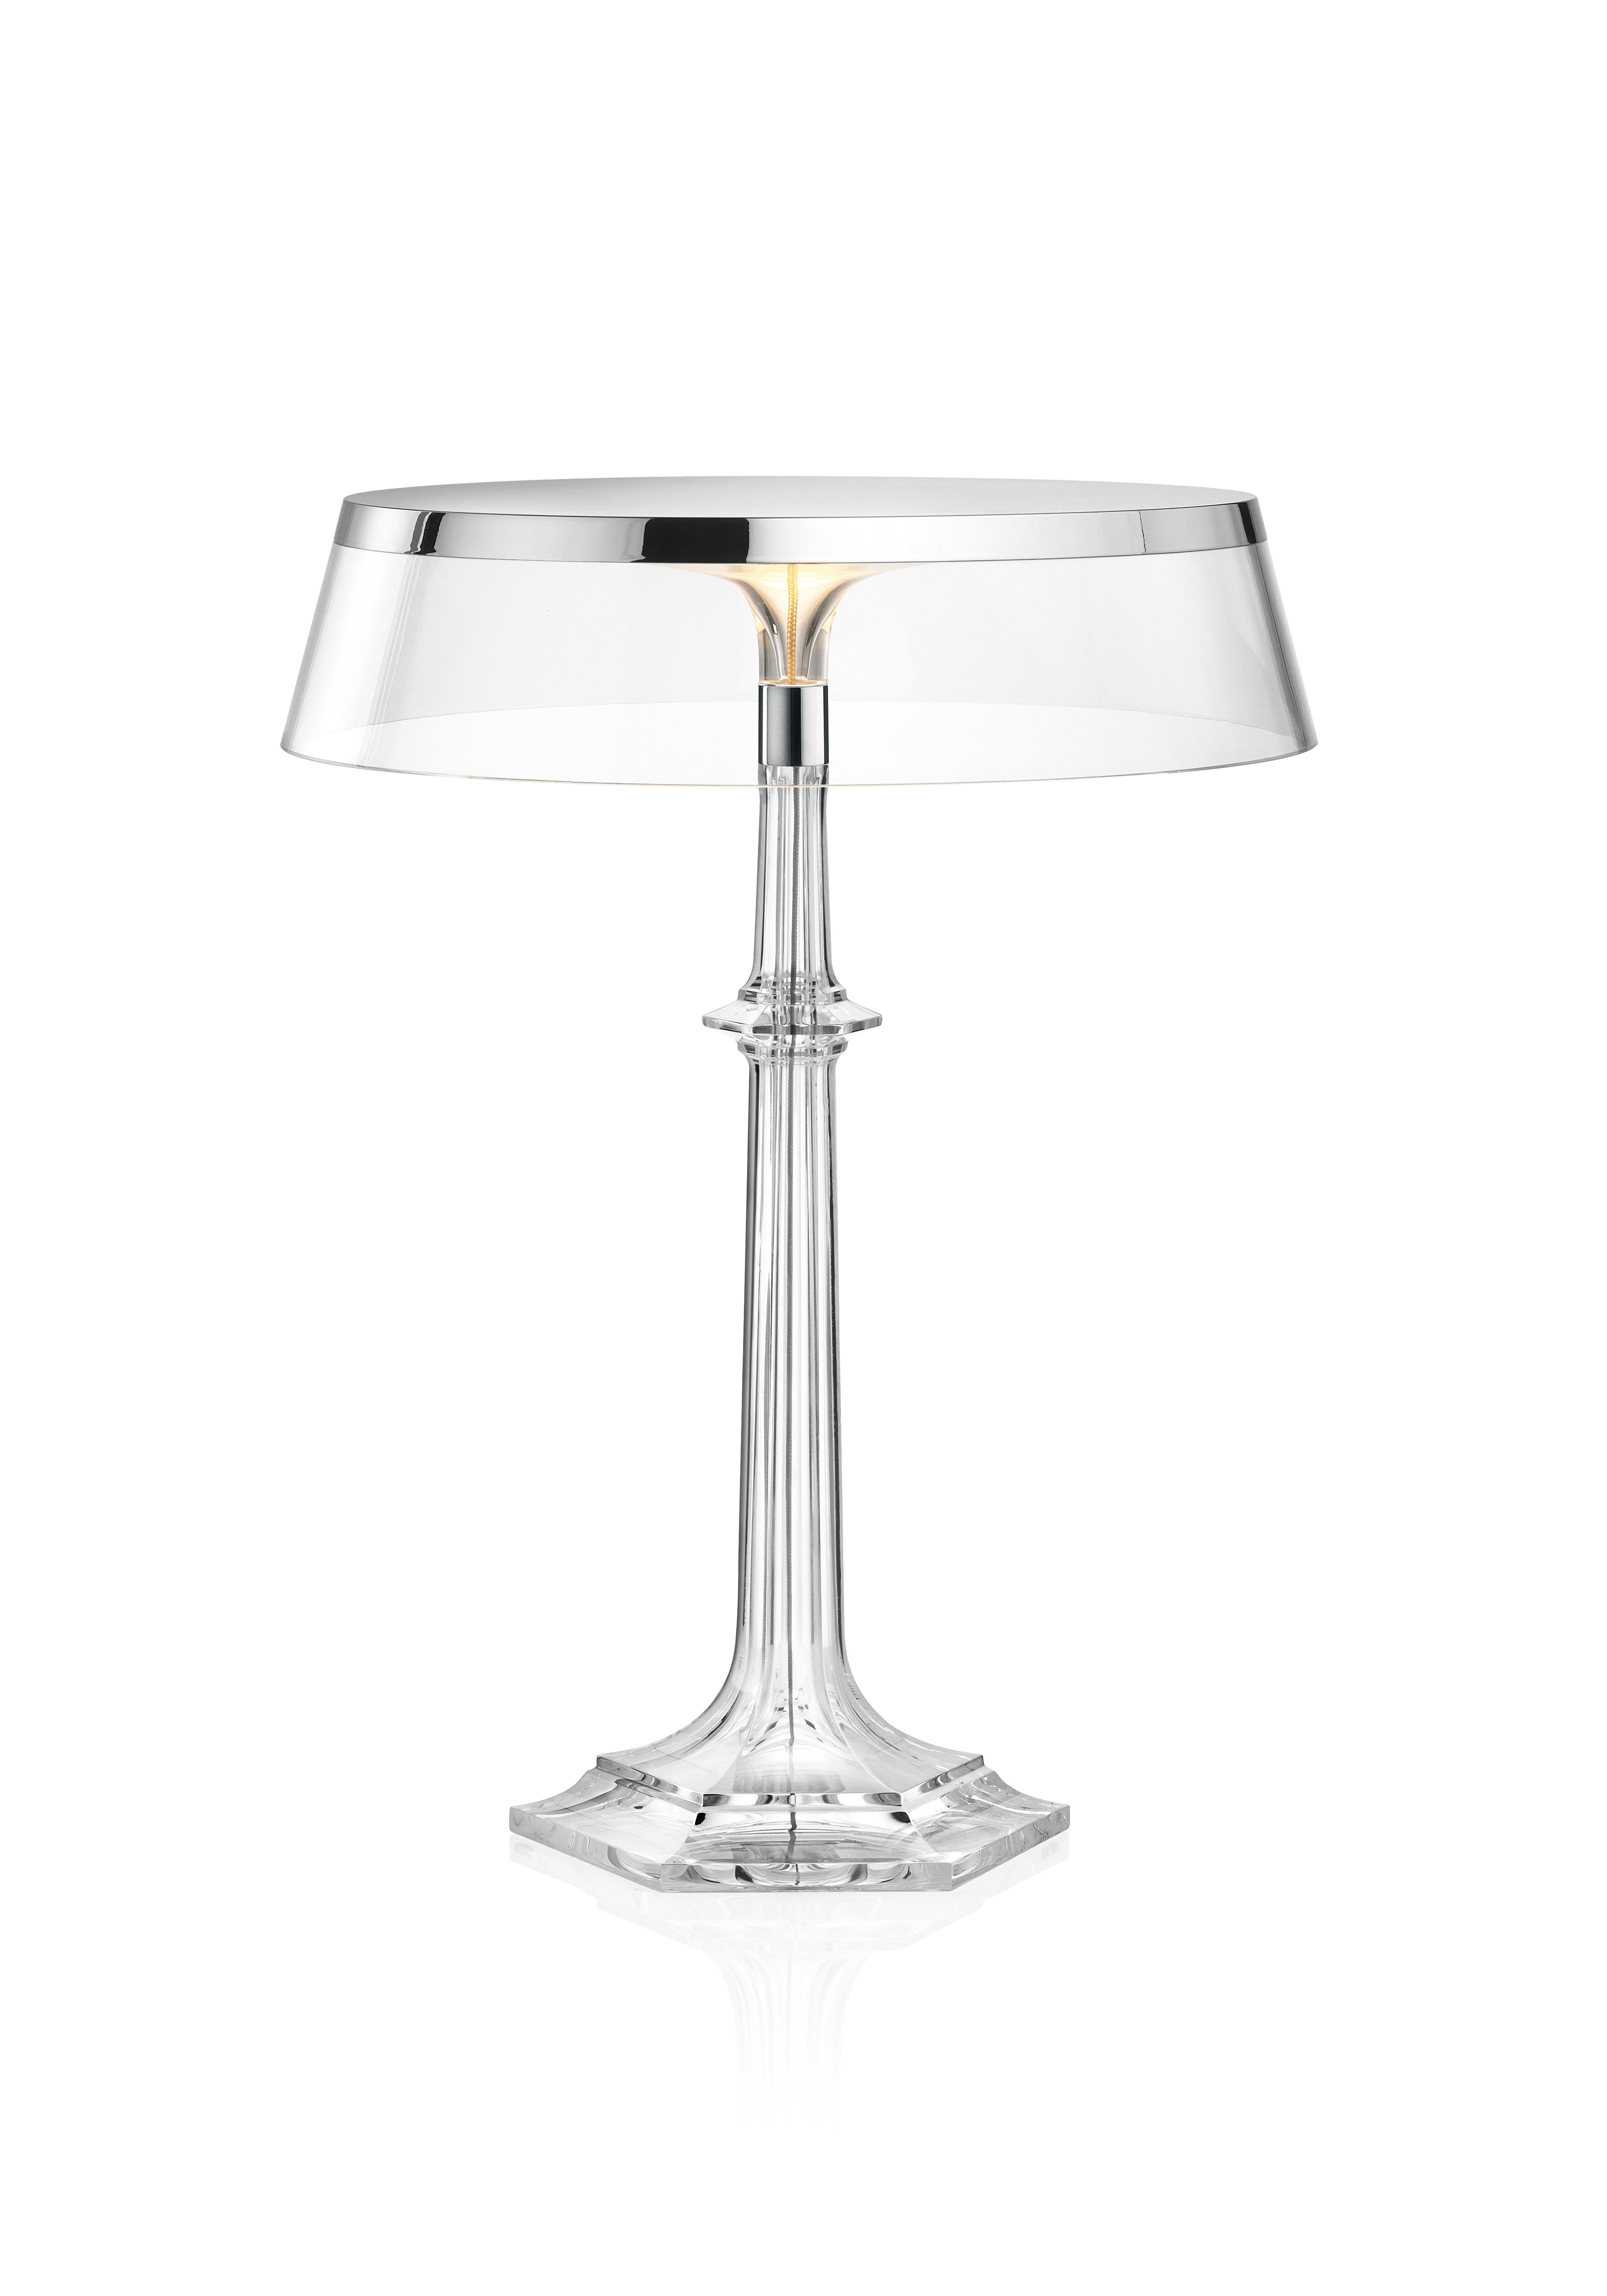 This modern and timeless design is a result of the collaboration between Flos and acclaimed designer Phillippe Starck. Blending together two dynamic pieces the Flos 2017 design Bon Jour Lamps and the Versaille candleholder created by Baccarat the